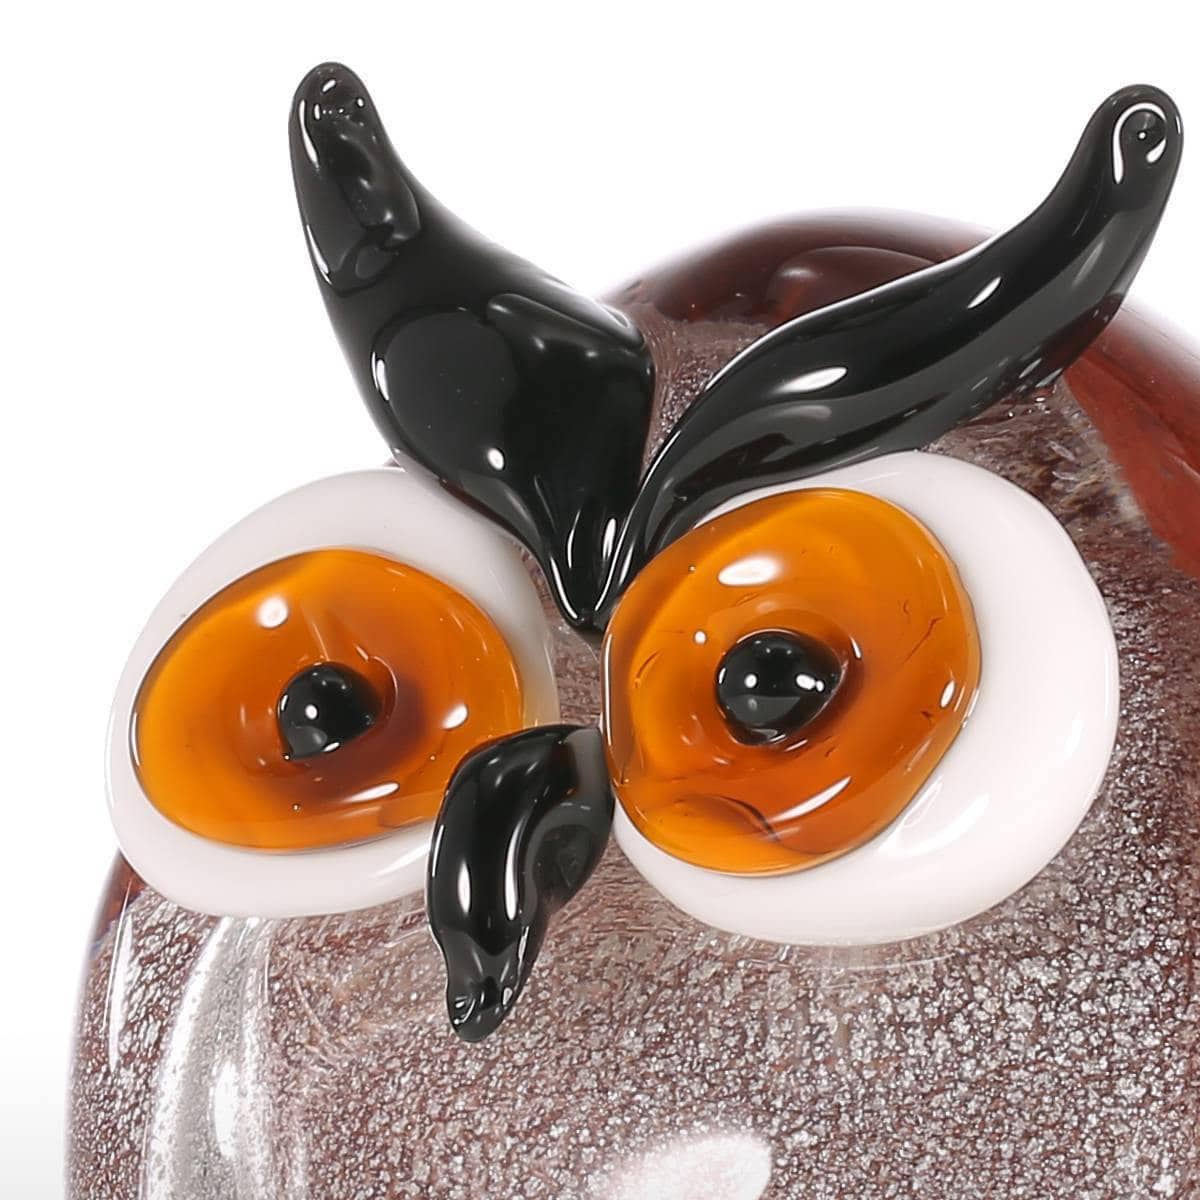 Chubby Owl Ornament Modern Home Decor - Cute & Playful Touch to Your Space